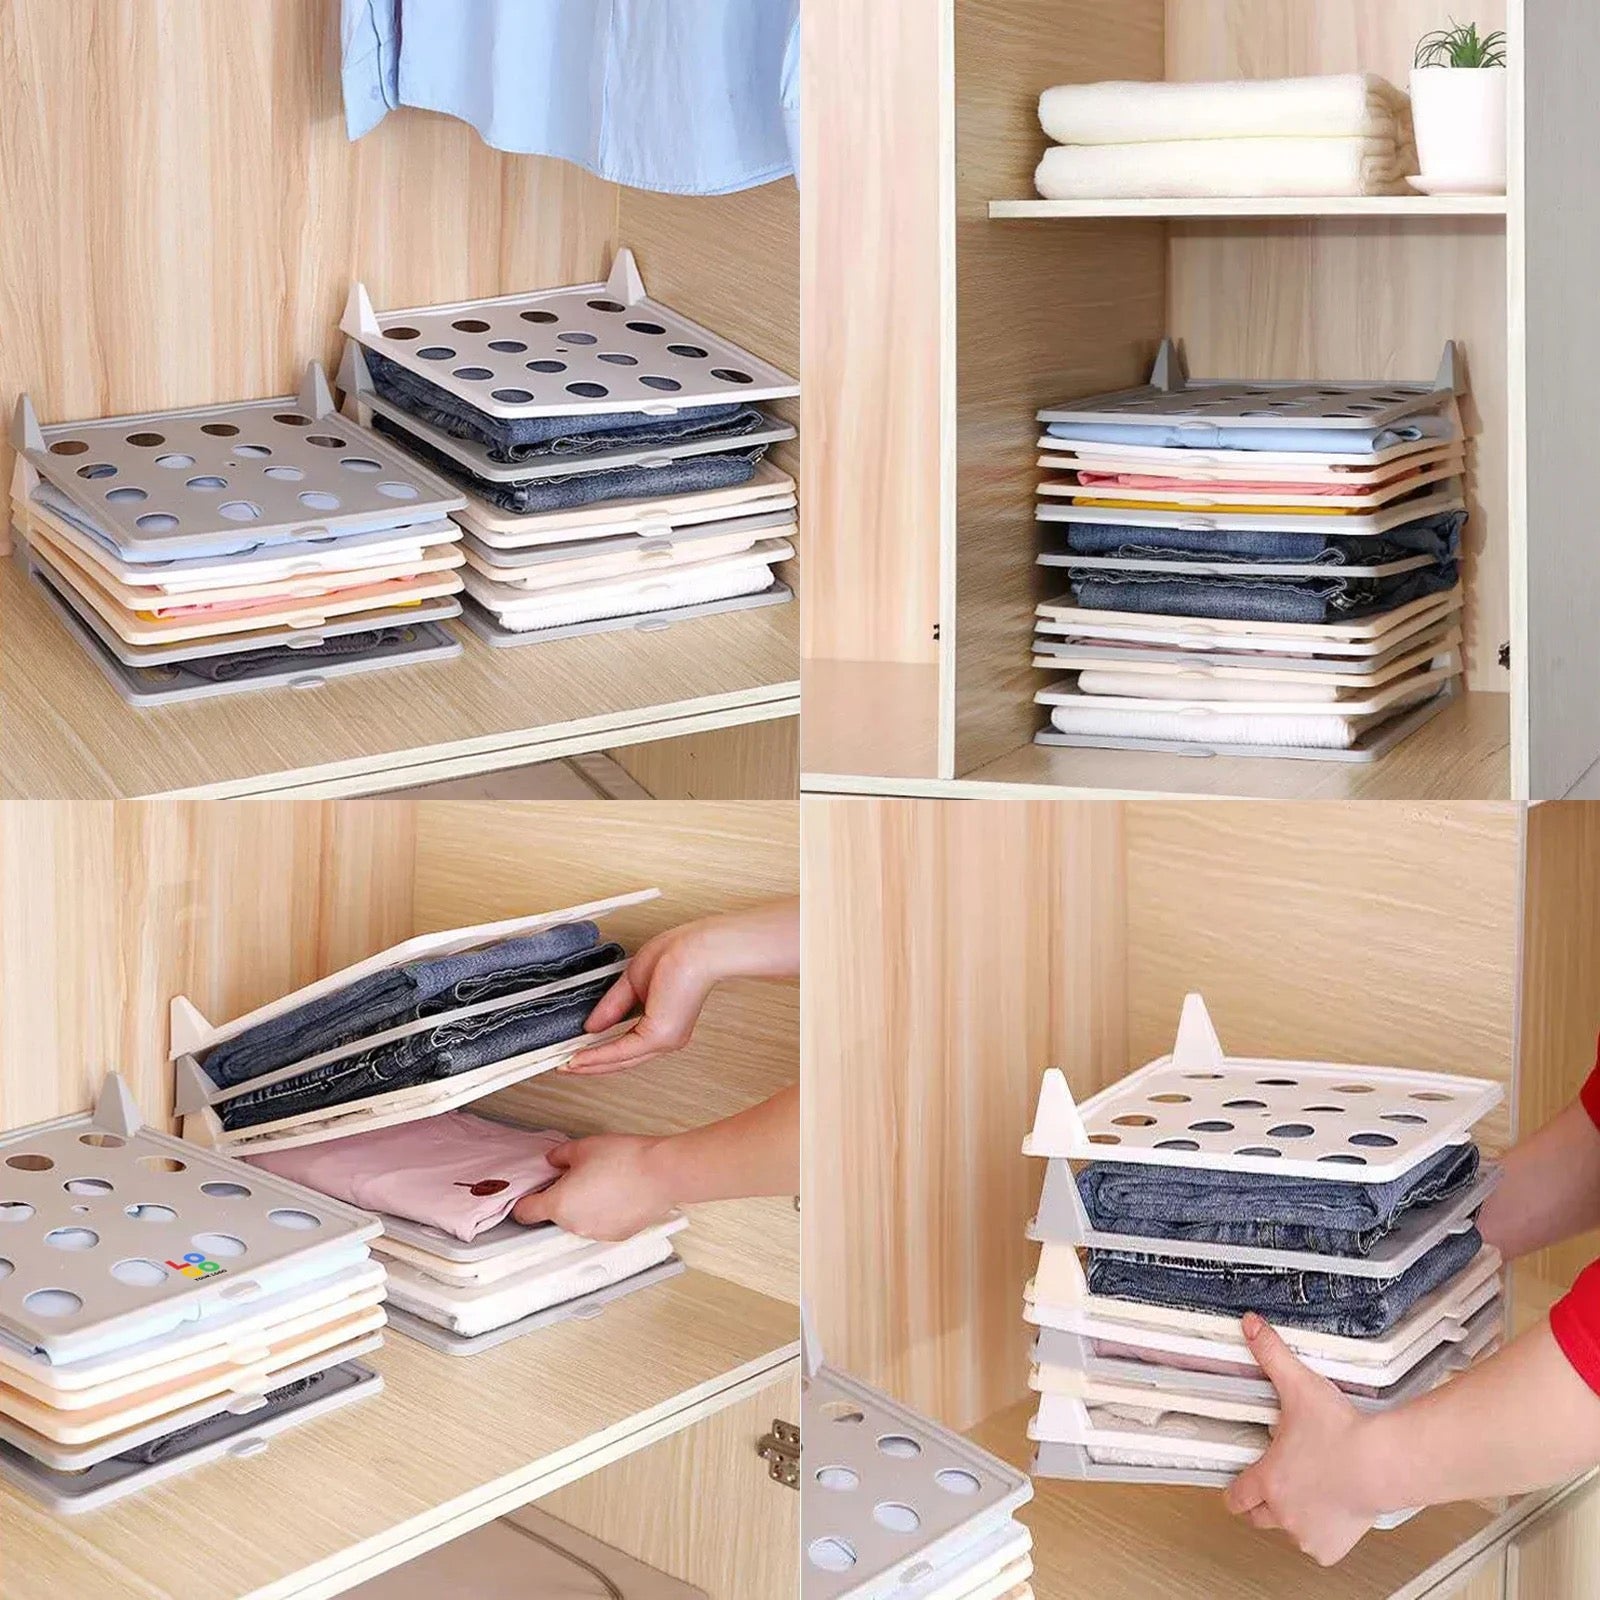 Wardrobe Clothes Stacking Organizer - collage,a person holding cloths folded using Wardrobe Clothes Stacking Organizer